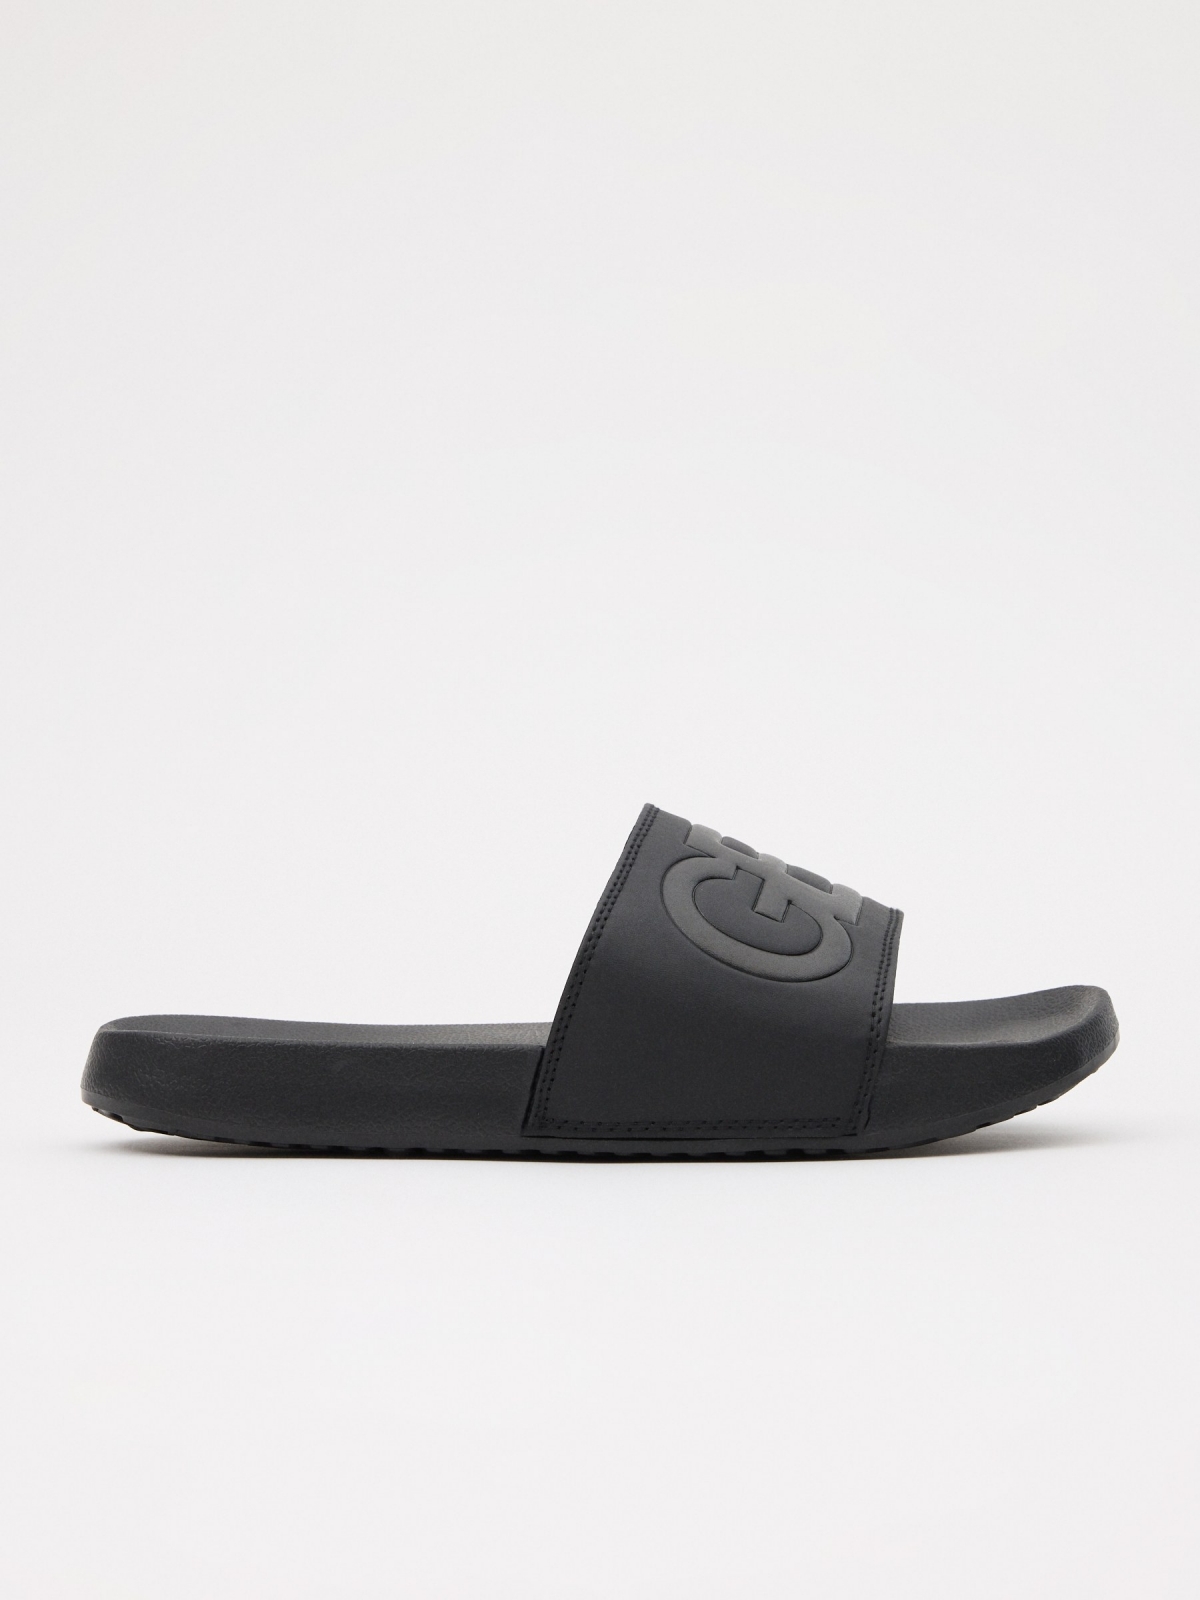 Embossed leather-effect shovel flip-flops black lateral view